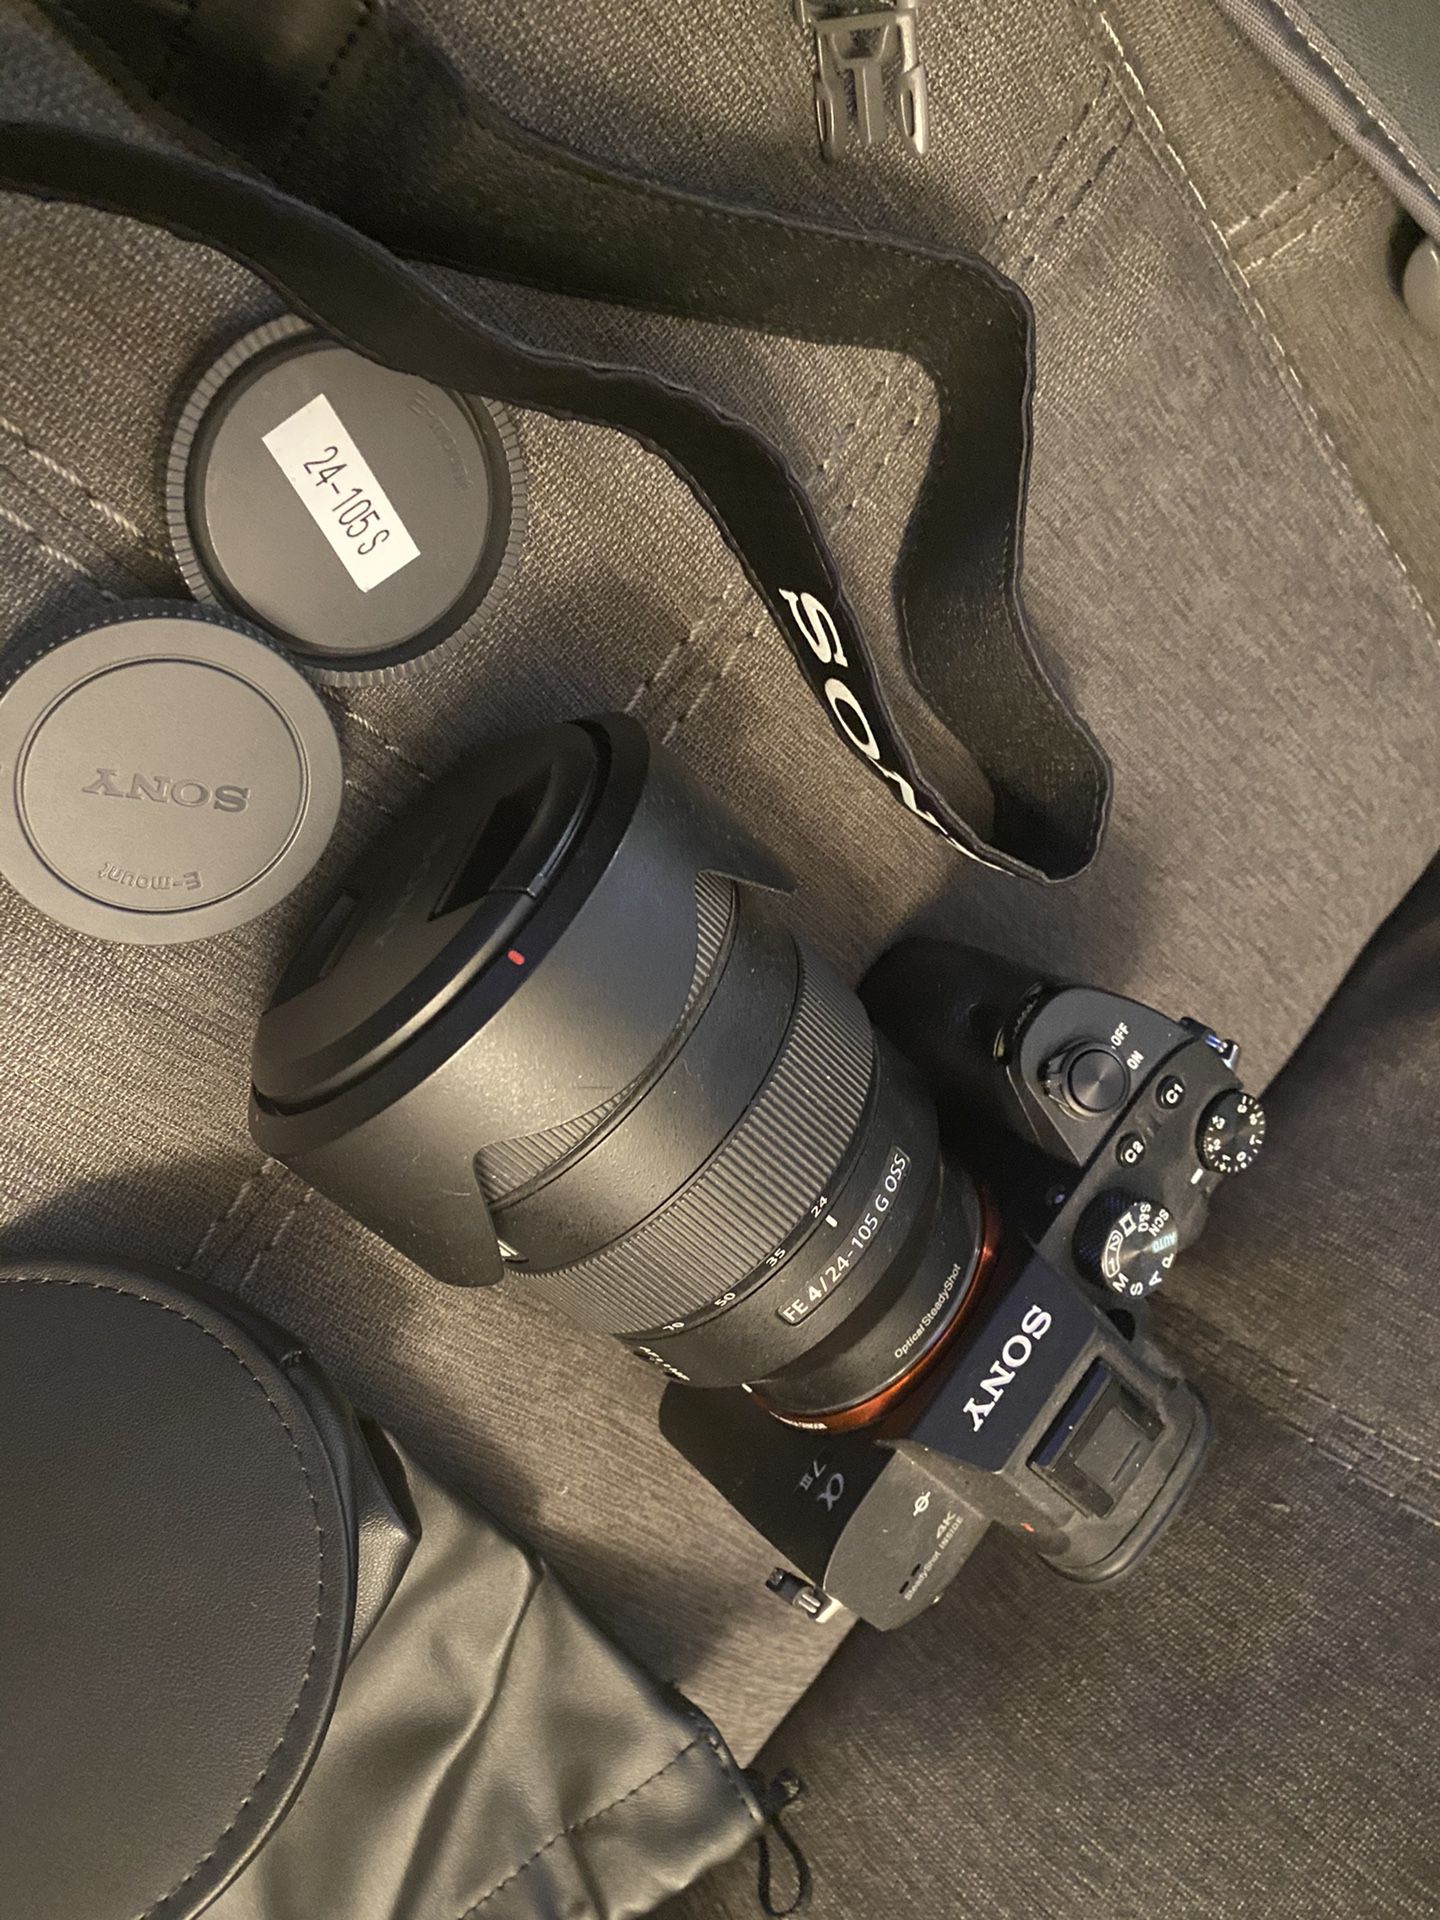 sony a7 iii with lens, Accessories Mega Bundle F4 24-105 G